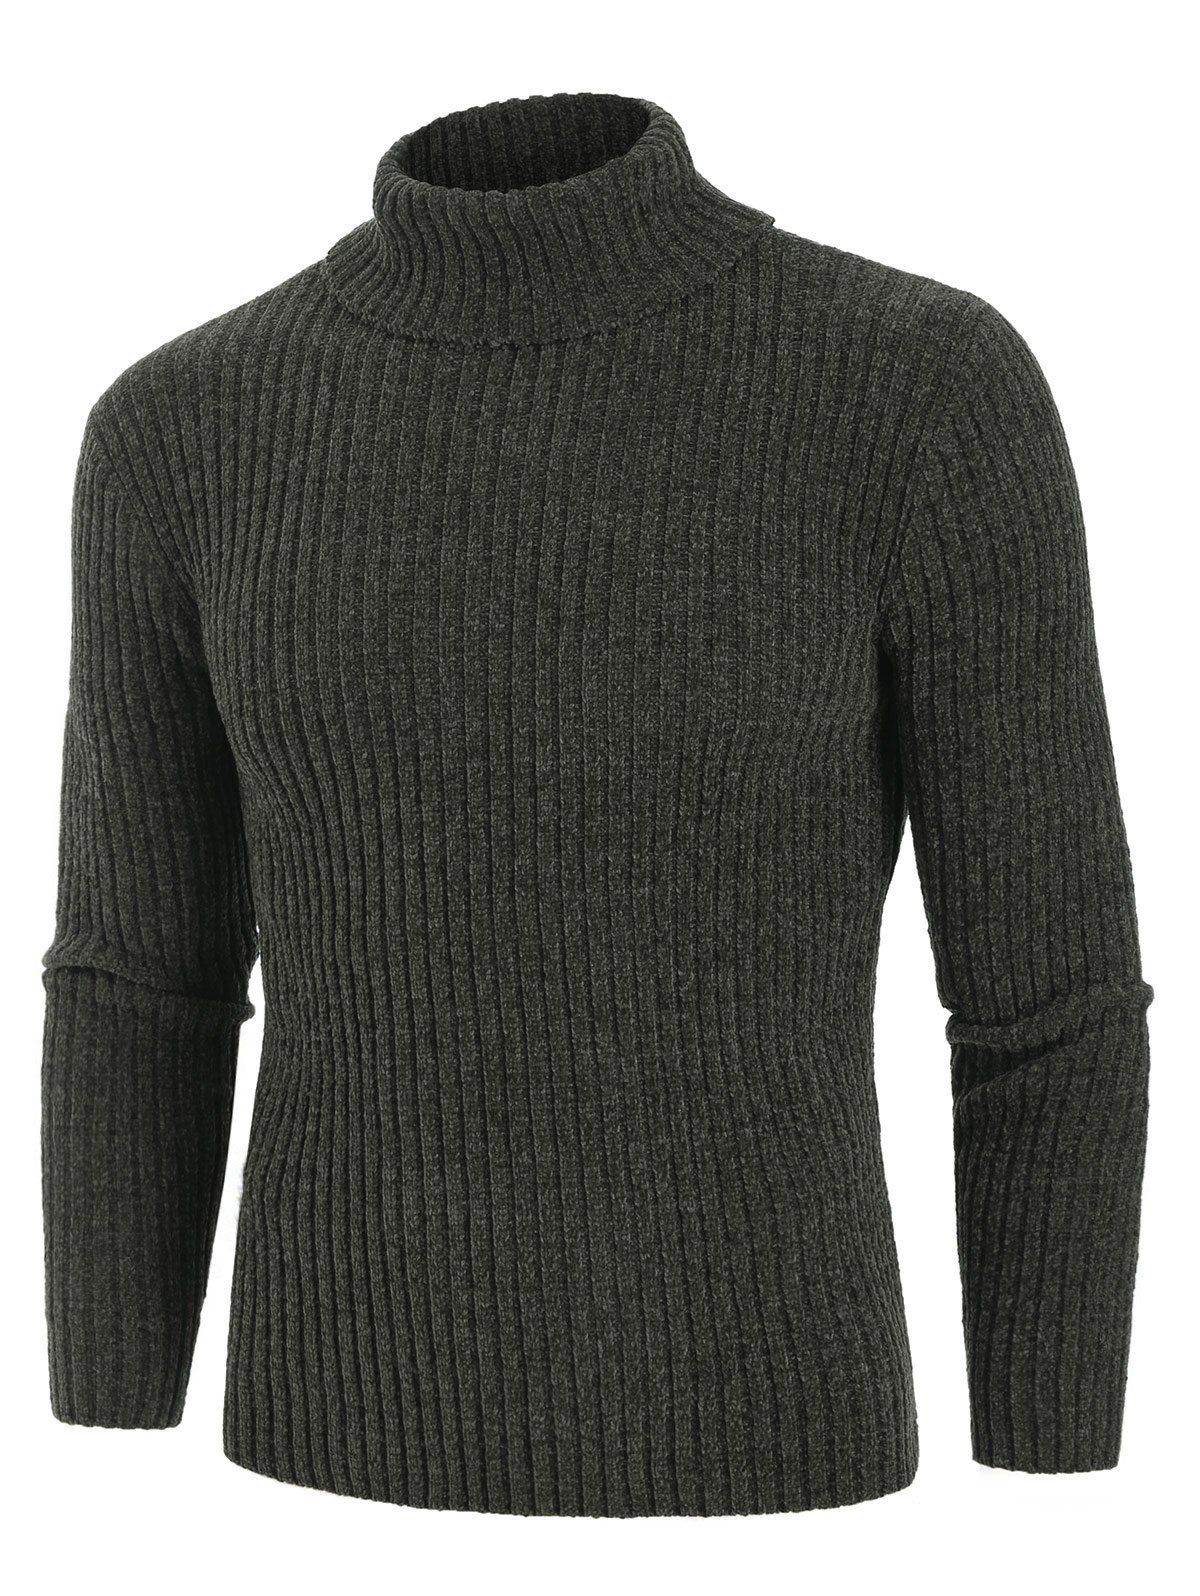 [36% OFF] 2021 Plain Turtleneck Chenille Long Sleeve Sweater In ARMY ...